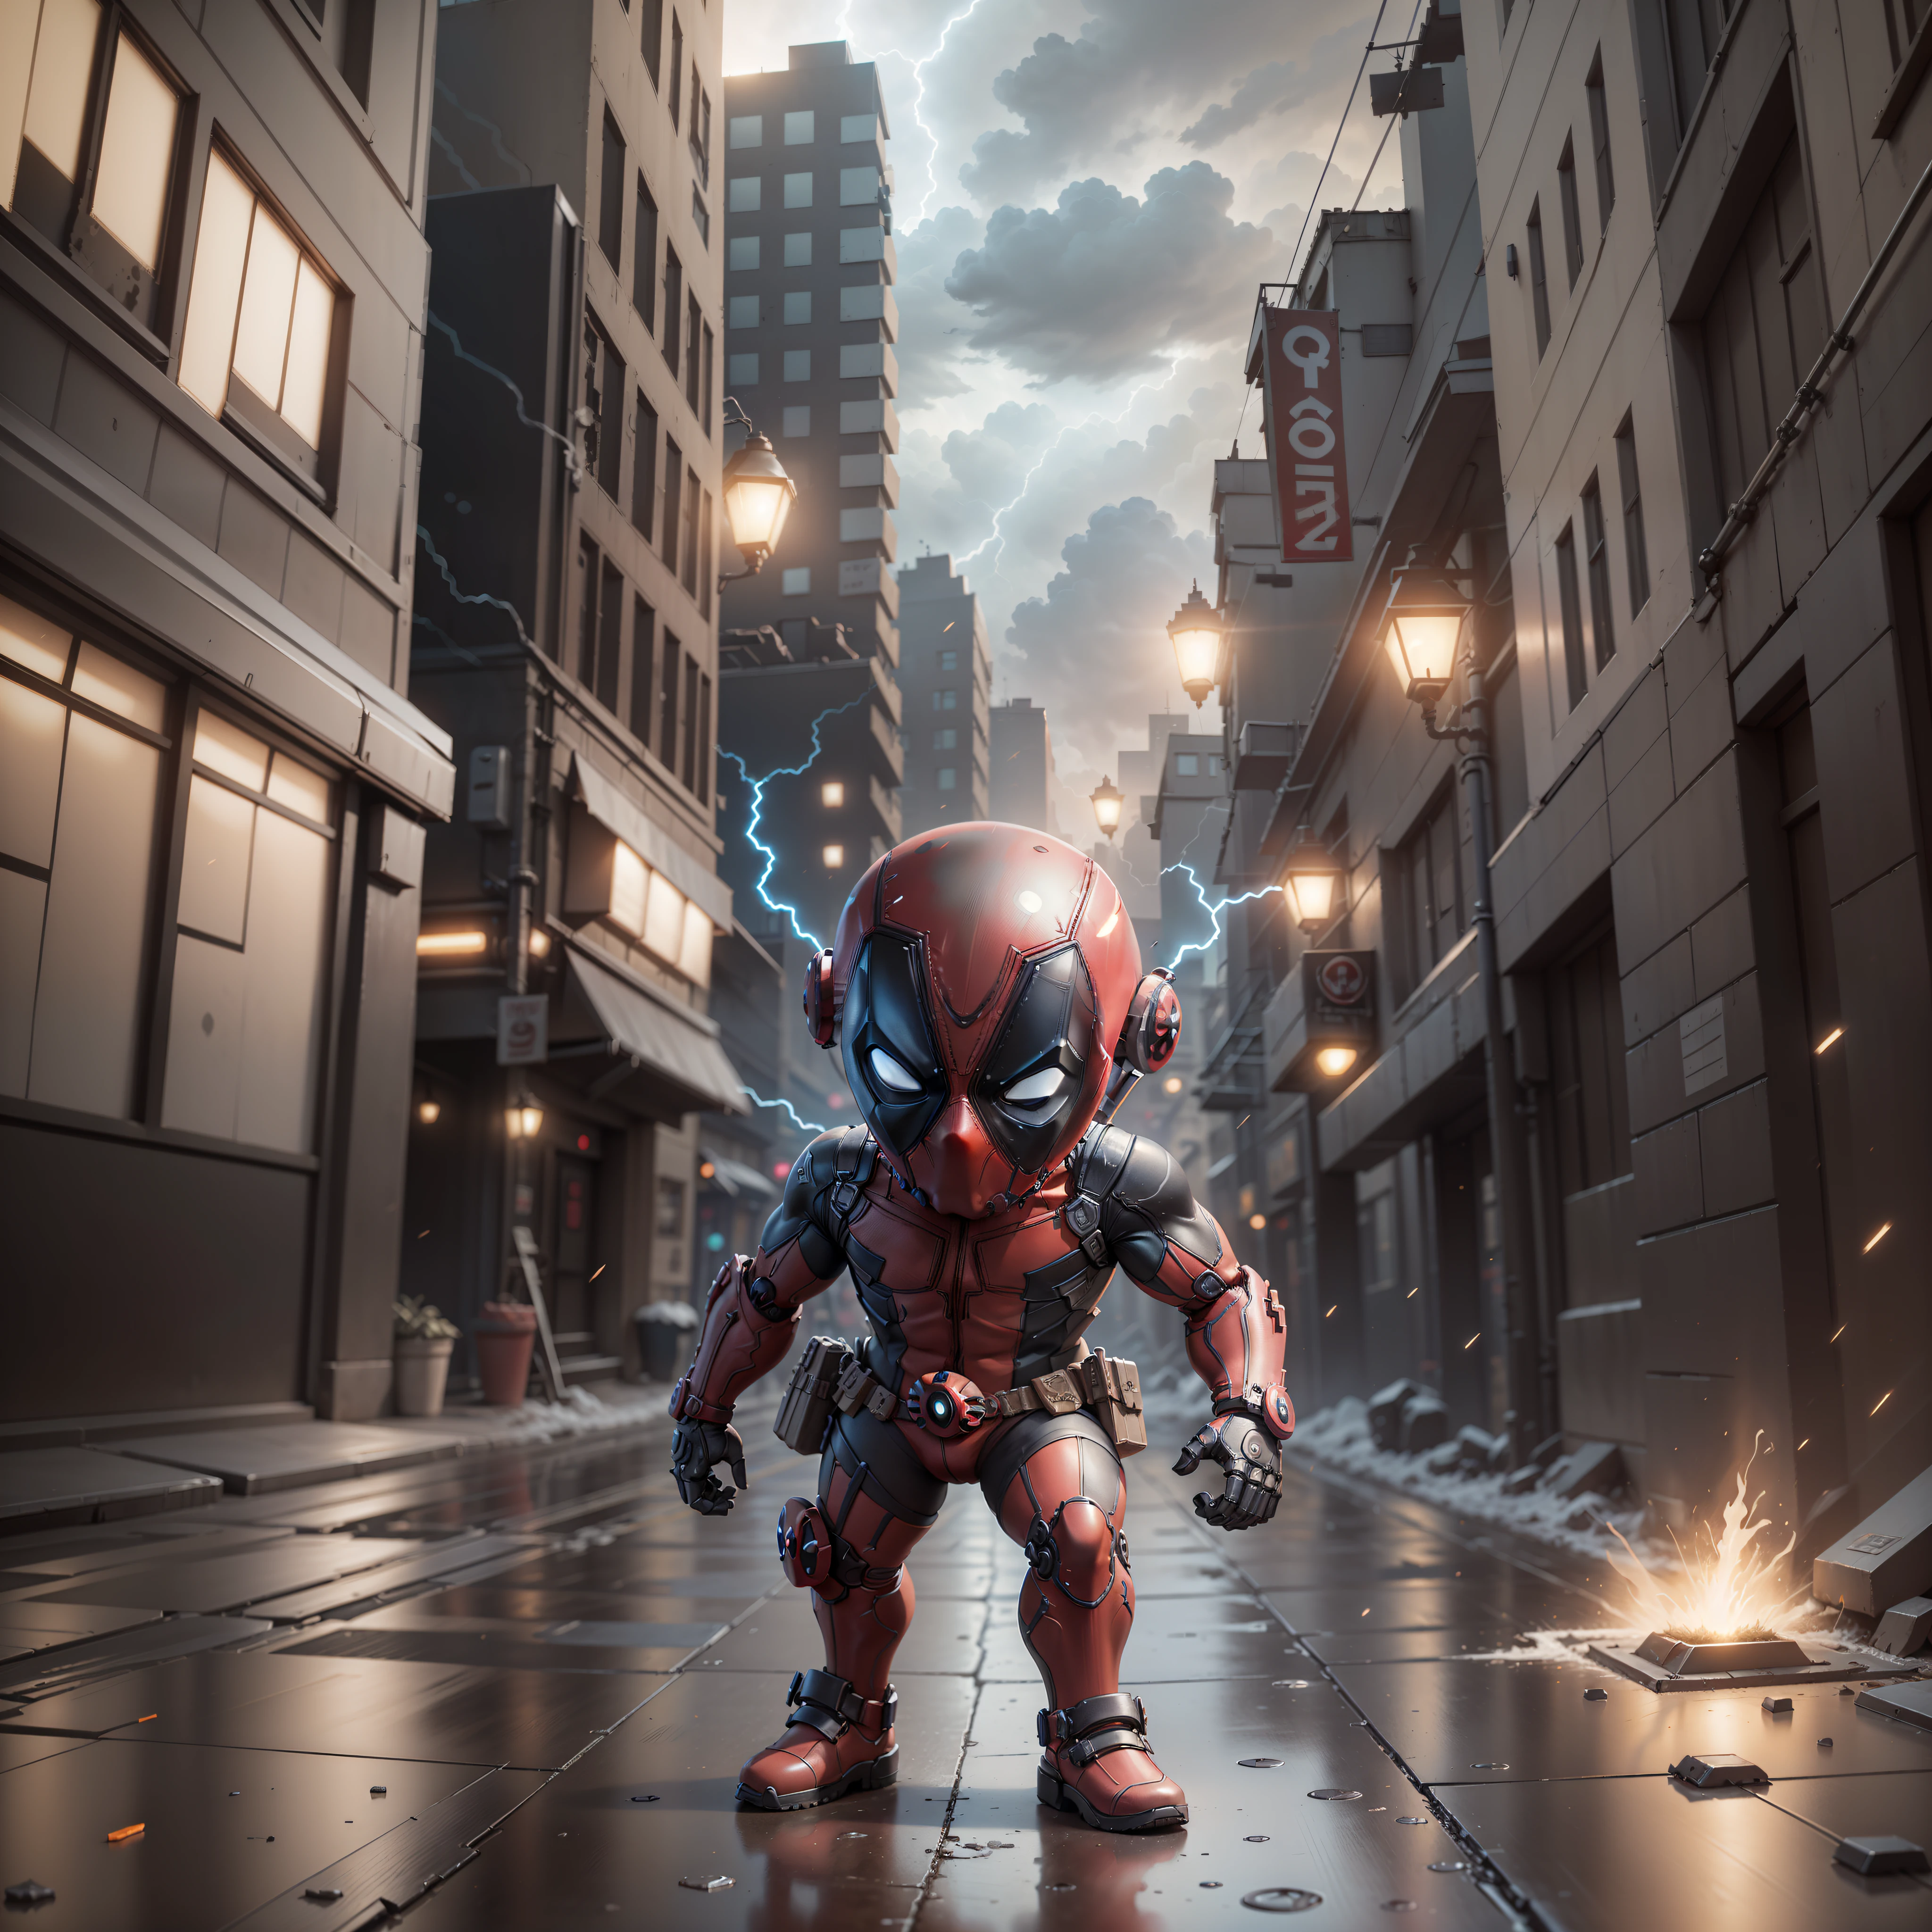 (Mechanical, cute little deadpool: 1.331), (Mechanical) Cute Style, Small, 3D Rendering, ((Q Version)), Machine Style, Cinematic Texture, Figures, Movie Lights, Heavy Robotic Arm, Background Surround Lightning, Lightning, Cool, war Background, Ray Tracing, Full Body 3D Model, Action, Stylish Blind Box Toys. (fill body:1.2) chibi